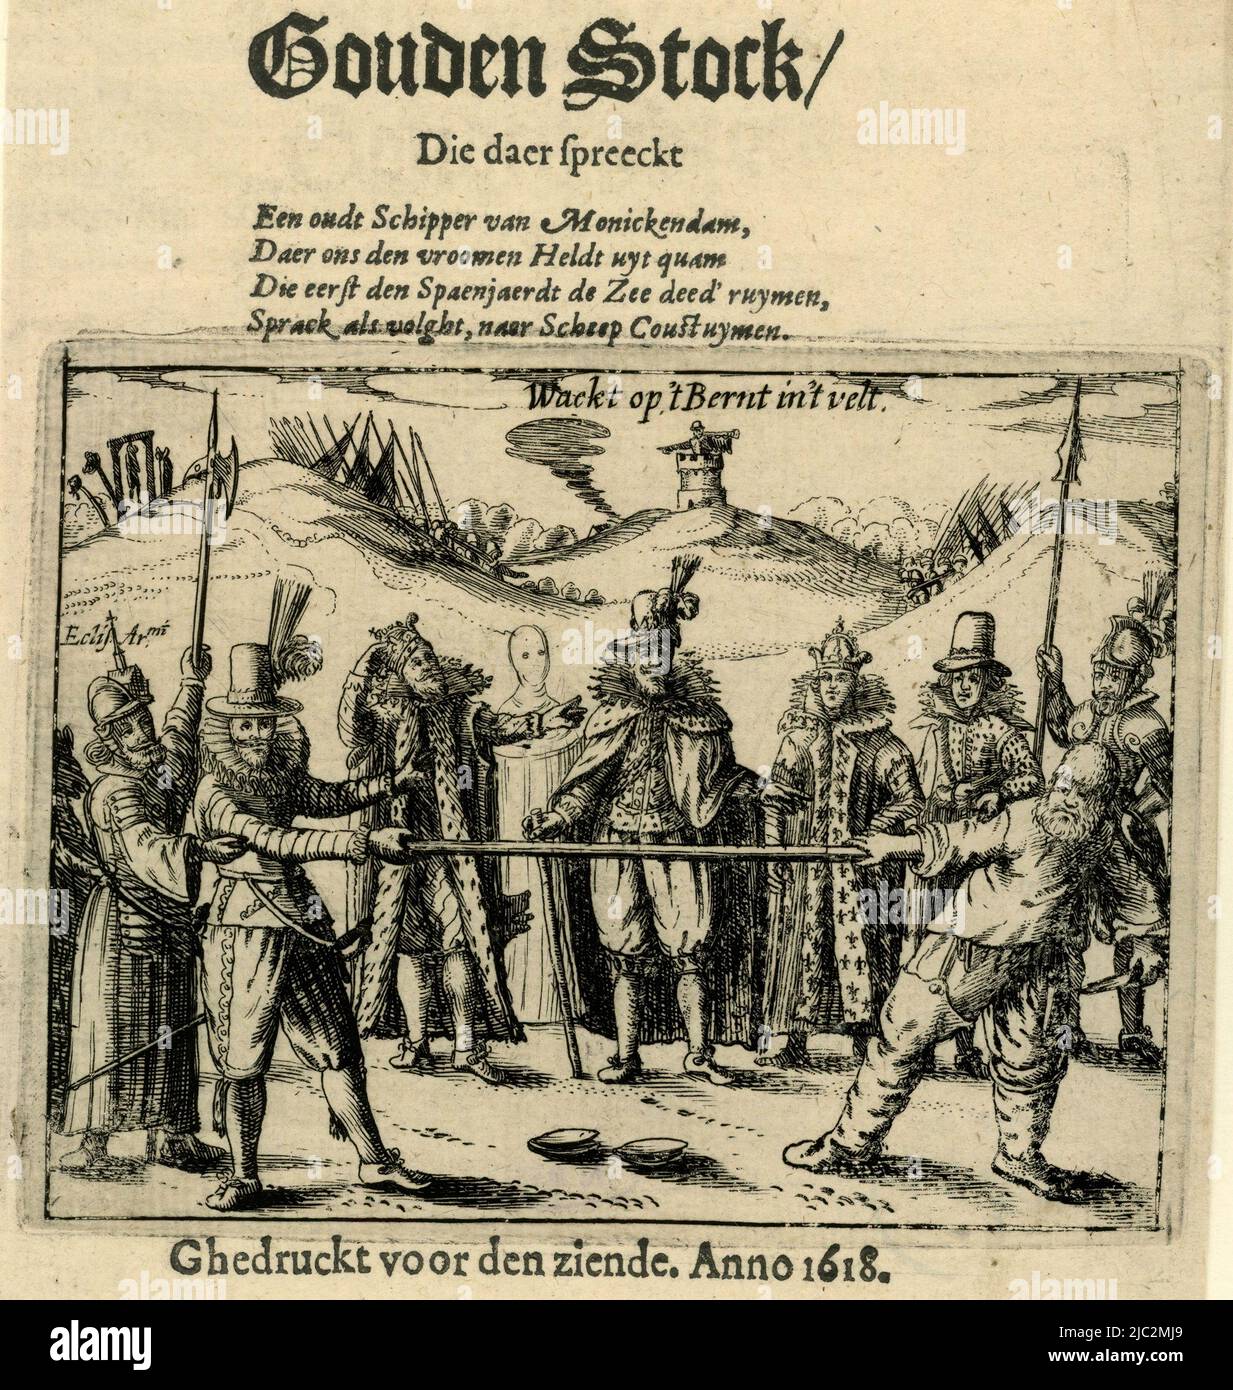 Title print of a pamphlet against Van Oldenbarnevelt, 1618. The scene shows a pulling contest between a boatman from Monnikendam and a Spaniard for 'the golden stick'. In the background, monarchs look on as if watching. The Spaniard is helped by an Arminian, probably Johan van Oldenbarnevelt, Title print of the pamphlet: Verclaringe van den Gouden Stock, 1618 Verclaringe van den Gouden Stock (title on object), print maker: anonymous, Northern Netherlands, 1618, paper, etching, letterpress printing, h 174 mm - w 141 mm Stock Photo